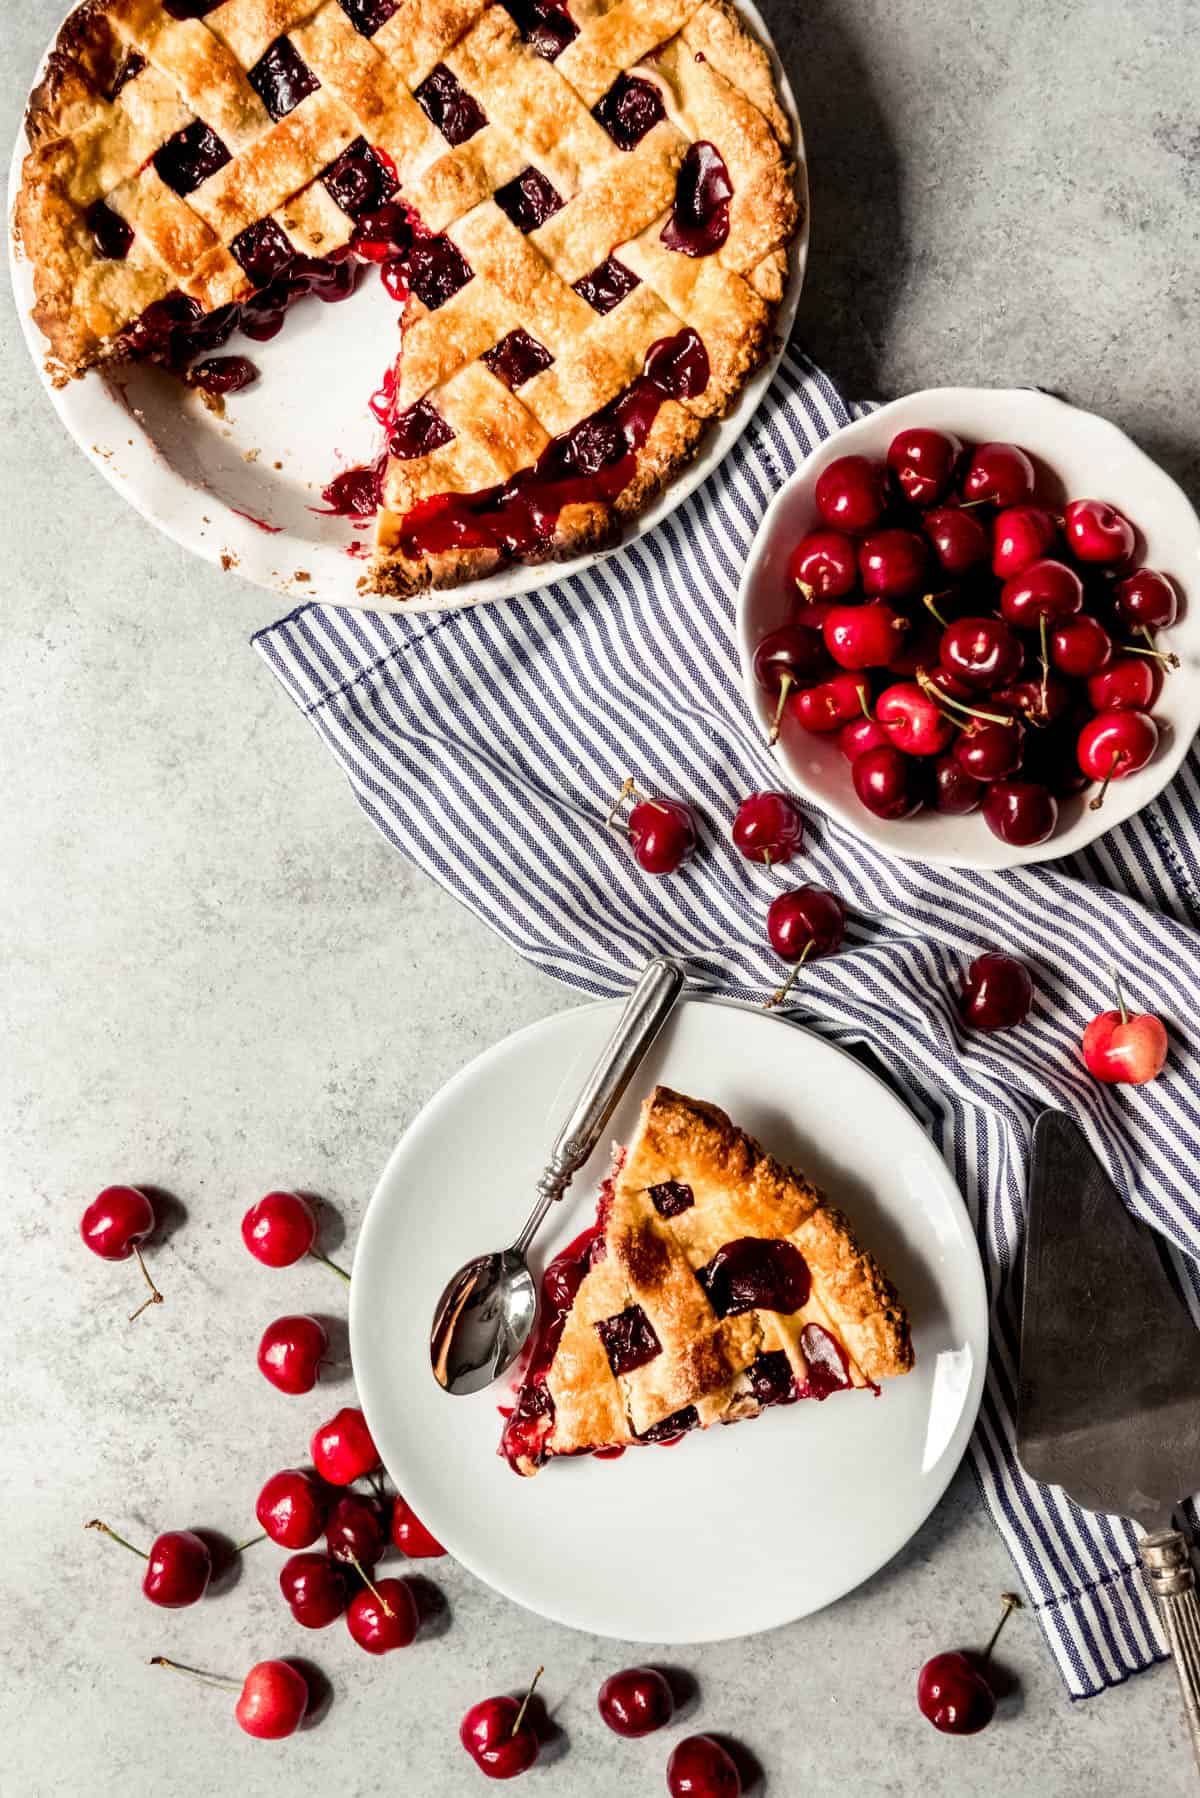 An image of a slice of classic cherry pie with lattice crust on a plate next to the whole pie and a bowl of fresh cherries.